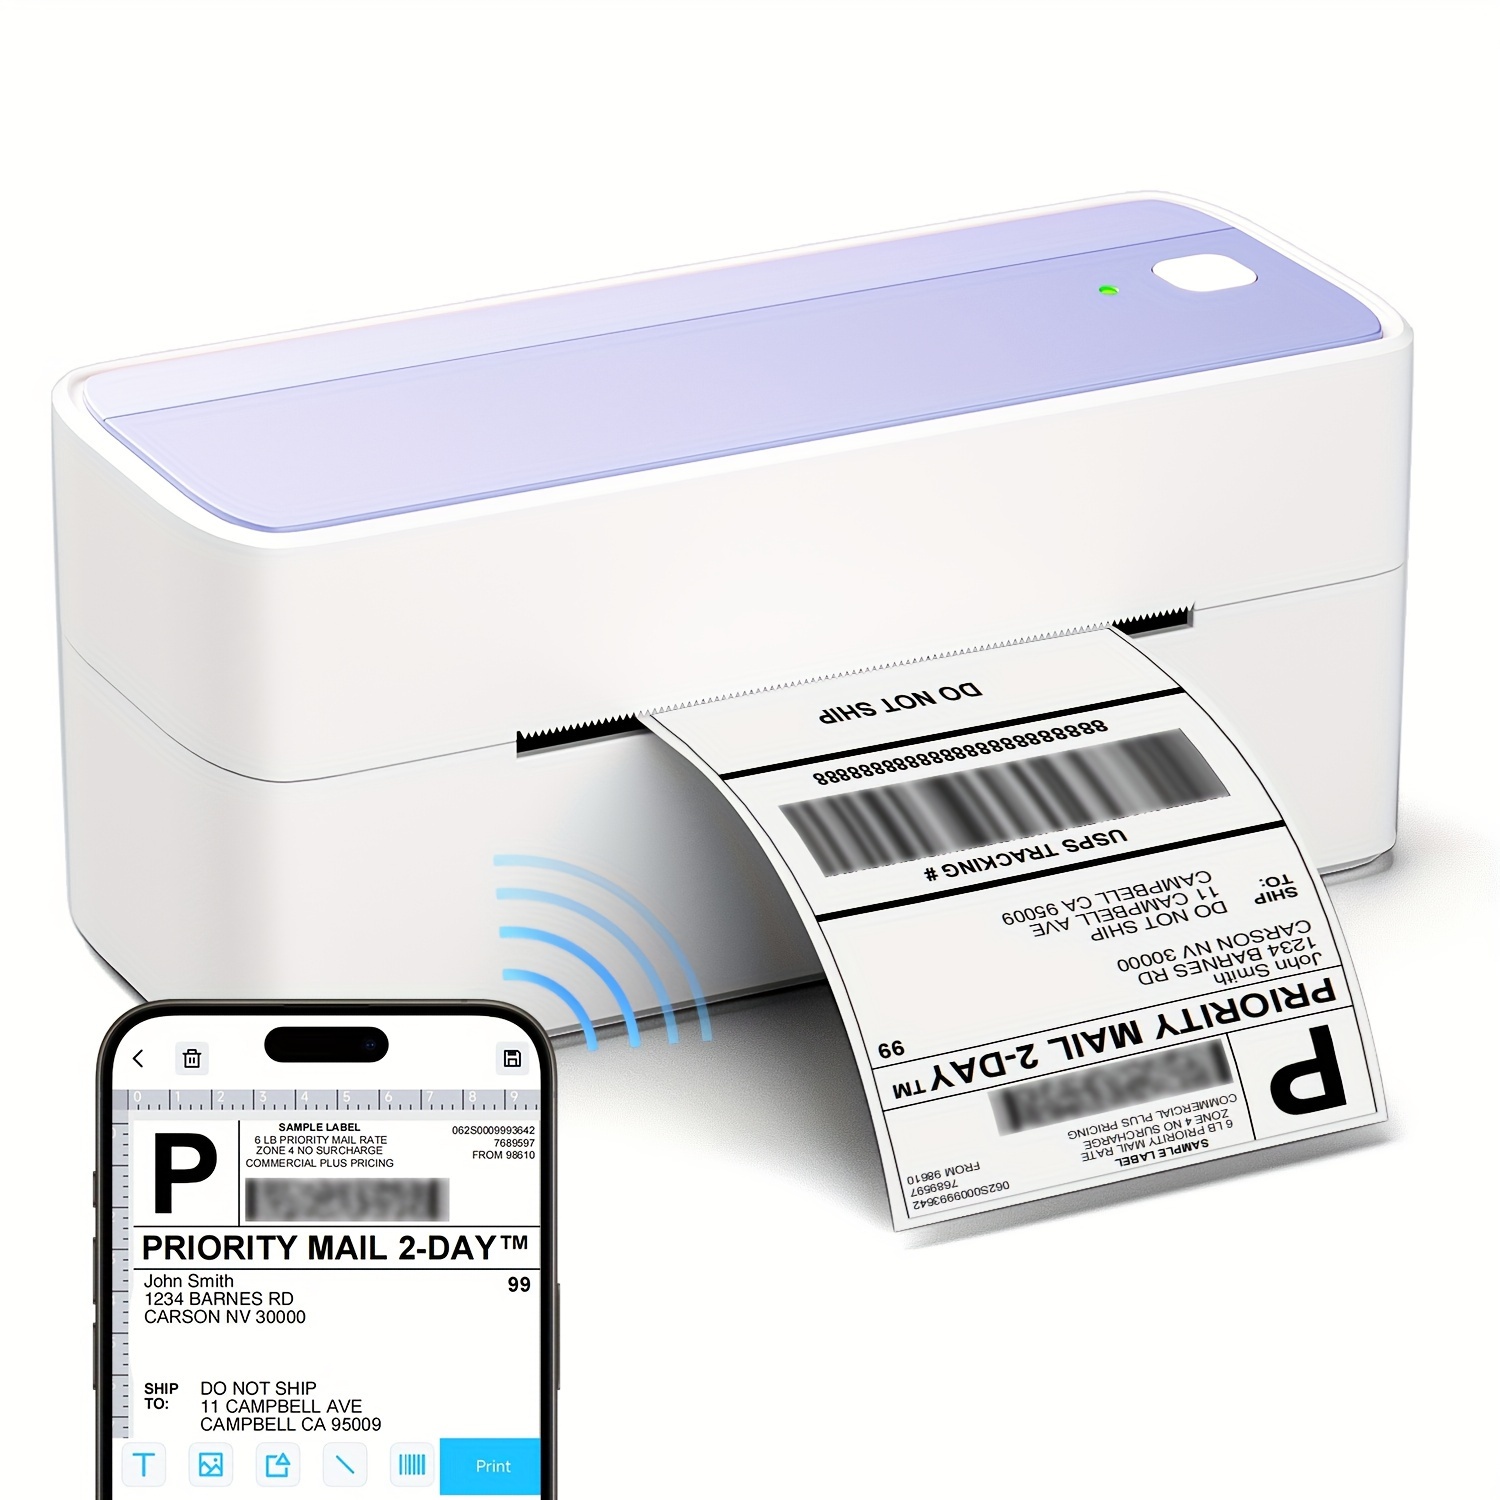 Bluetooth Thermal Label Printer, Phomemo Wireless 4x6 Shipping Label  Printer for Shipping Packages, High Speed Desktop Label Maker for Small  Business